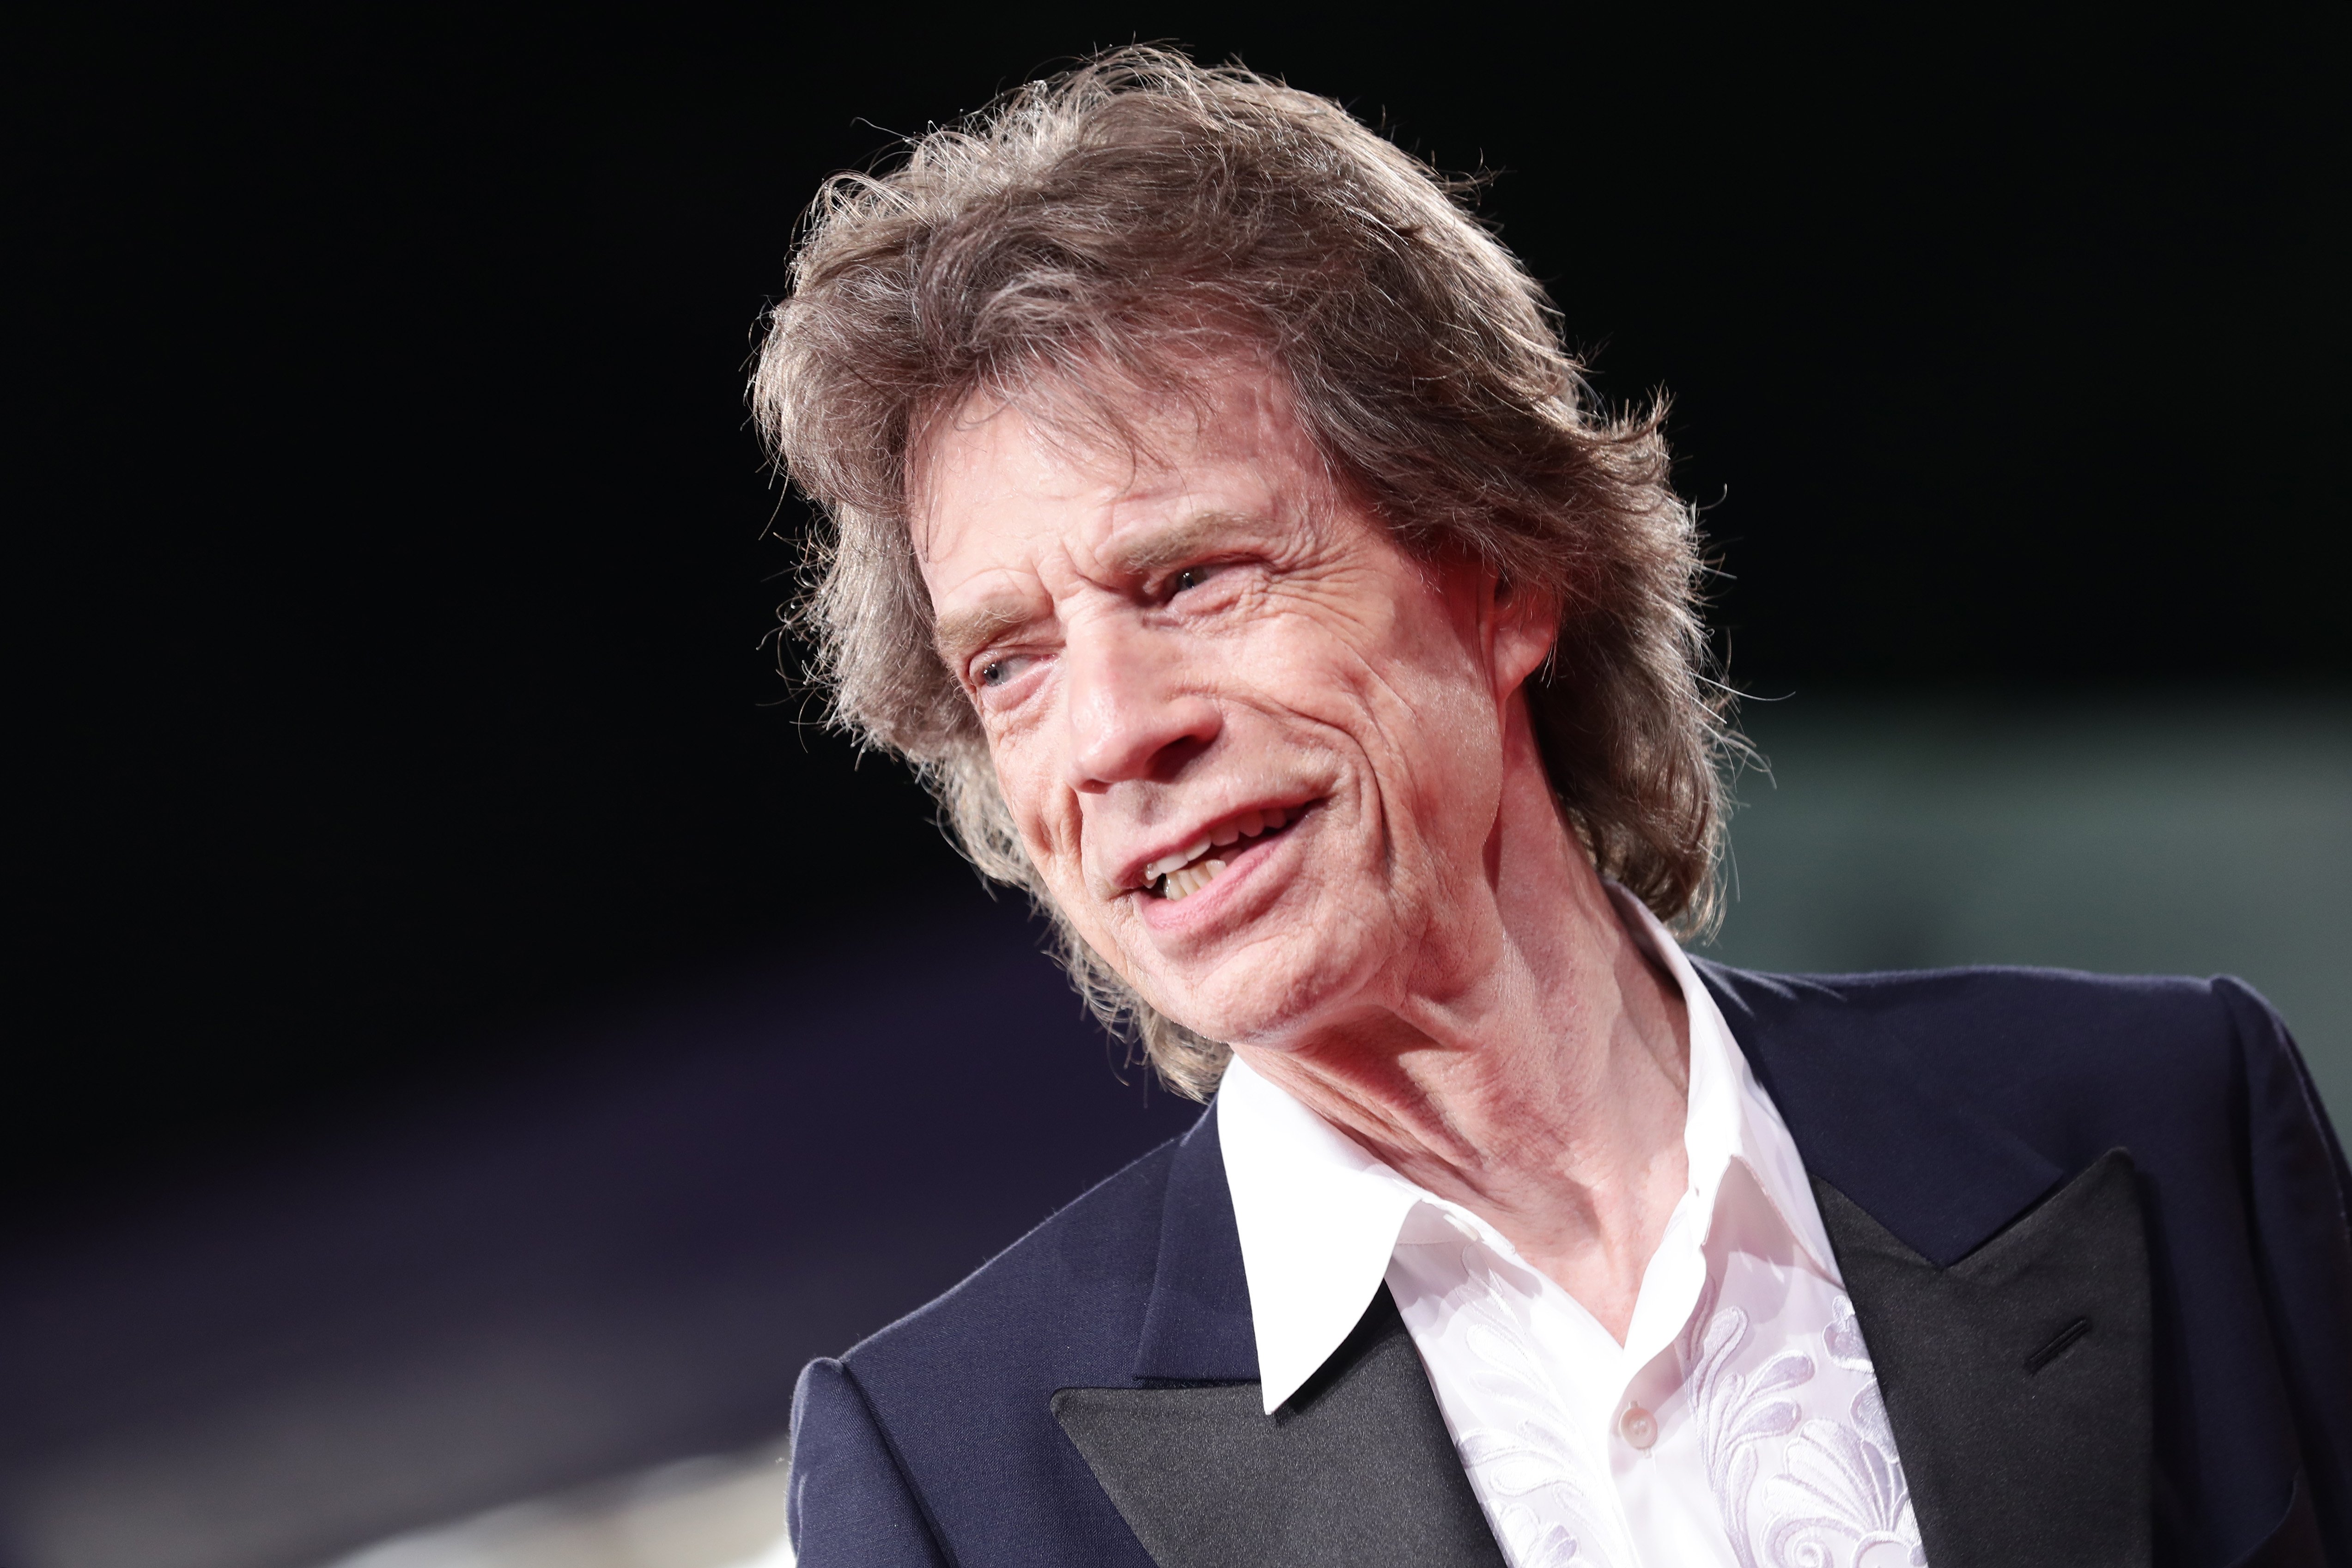 Mick Jagger at the 76th Venice Film Festival at Sala Grande on September 07, 2019 in Venice, Italy. | Photo: Getty Images